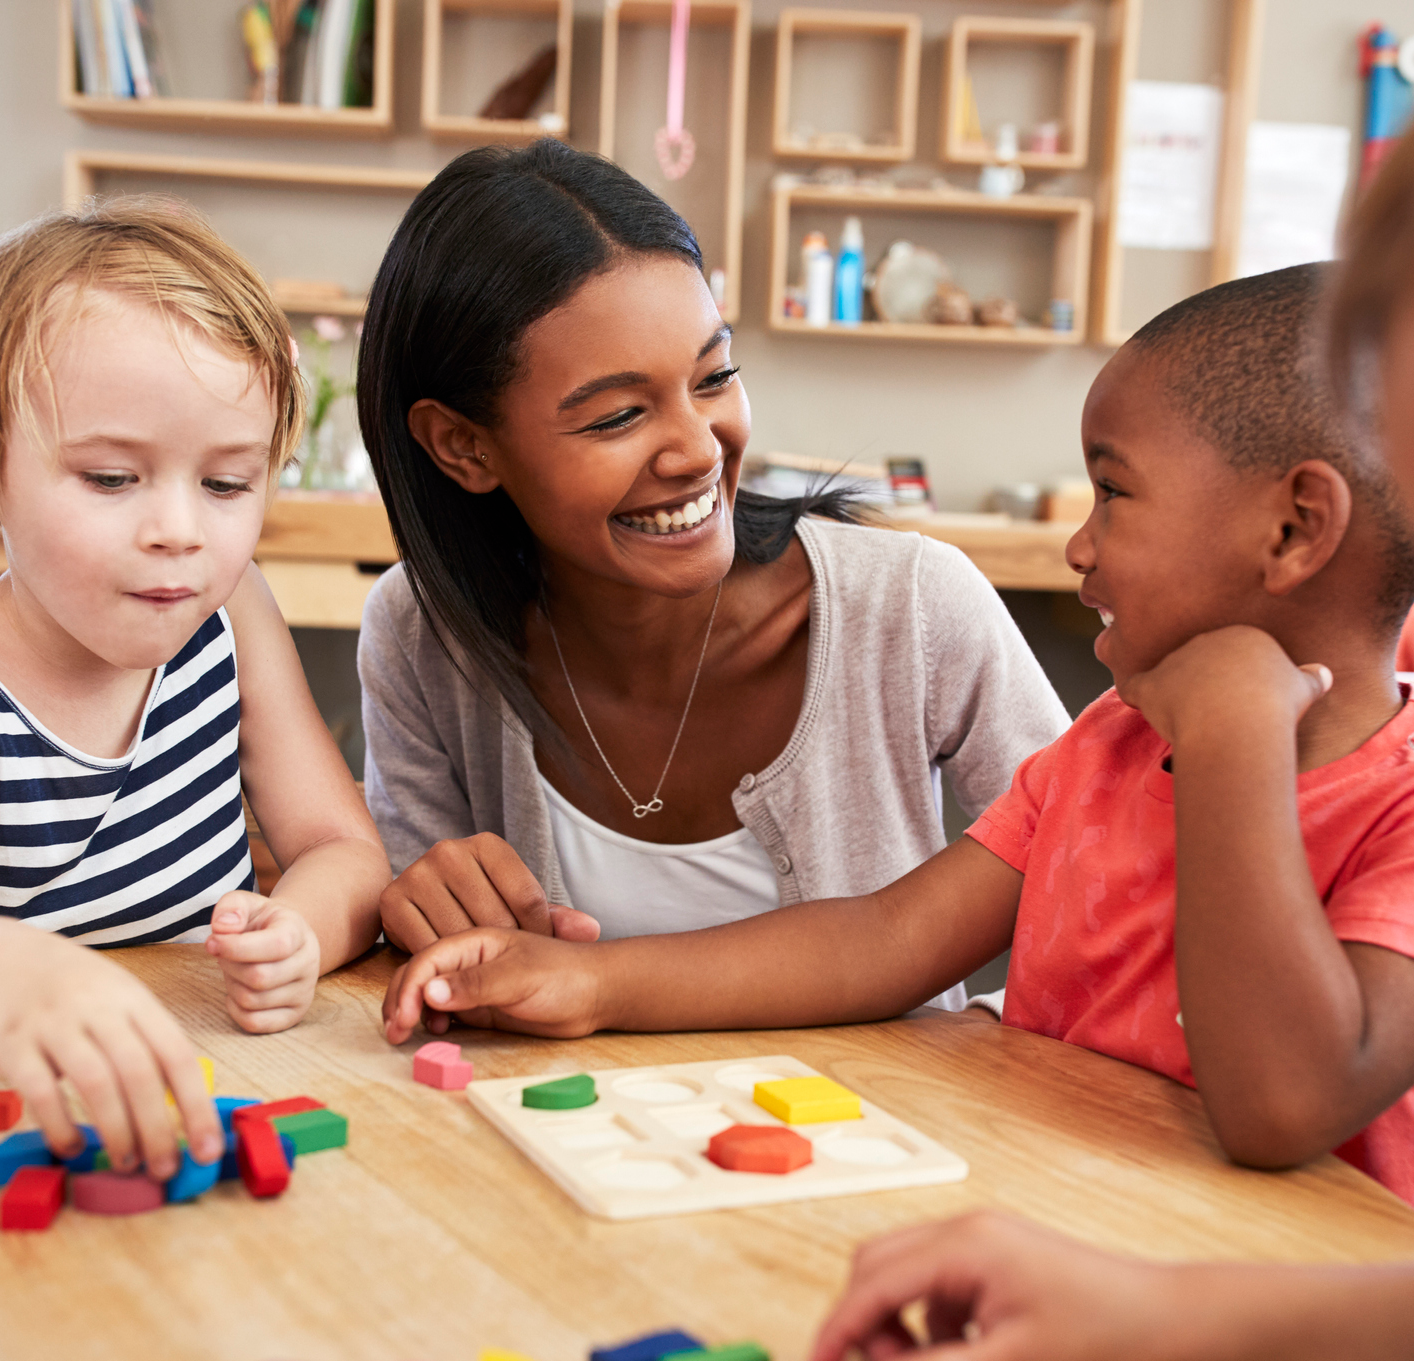 Childcare & Education Information for Parents in South Carolina